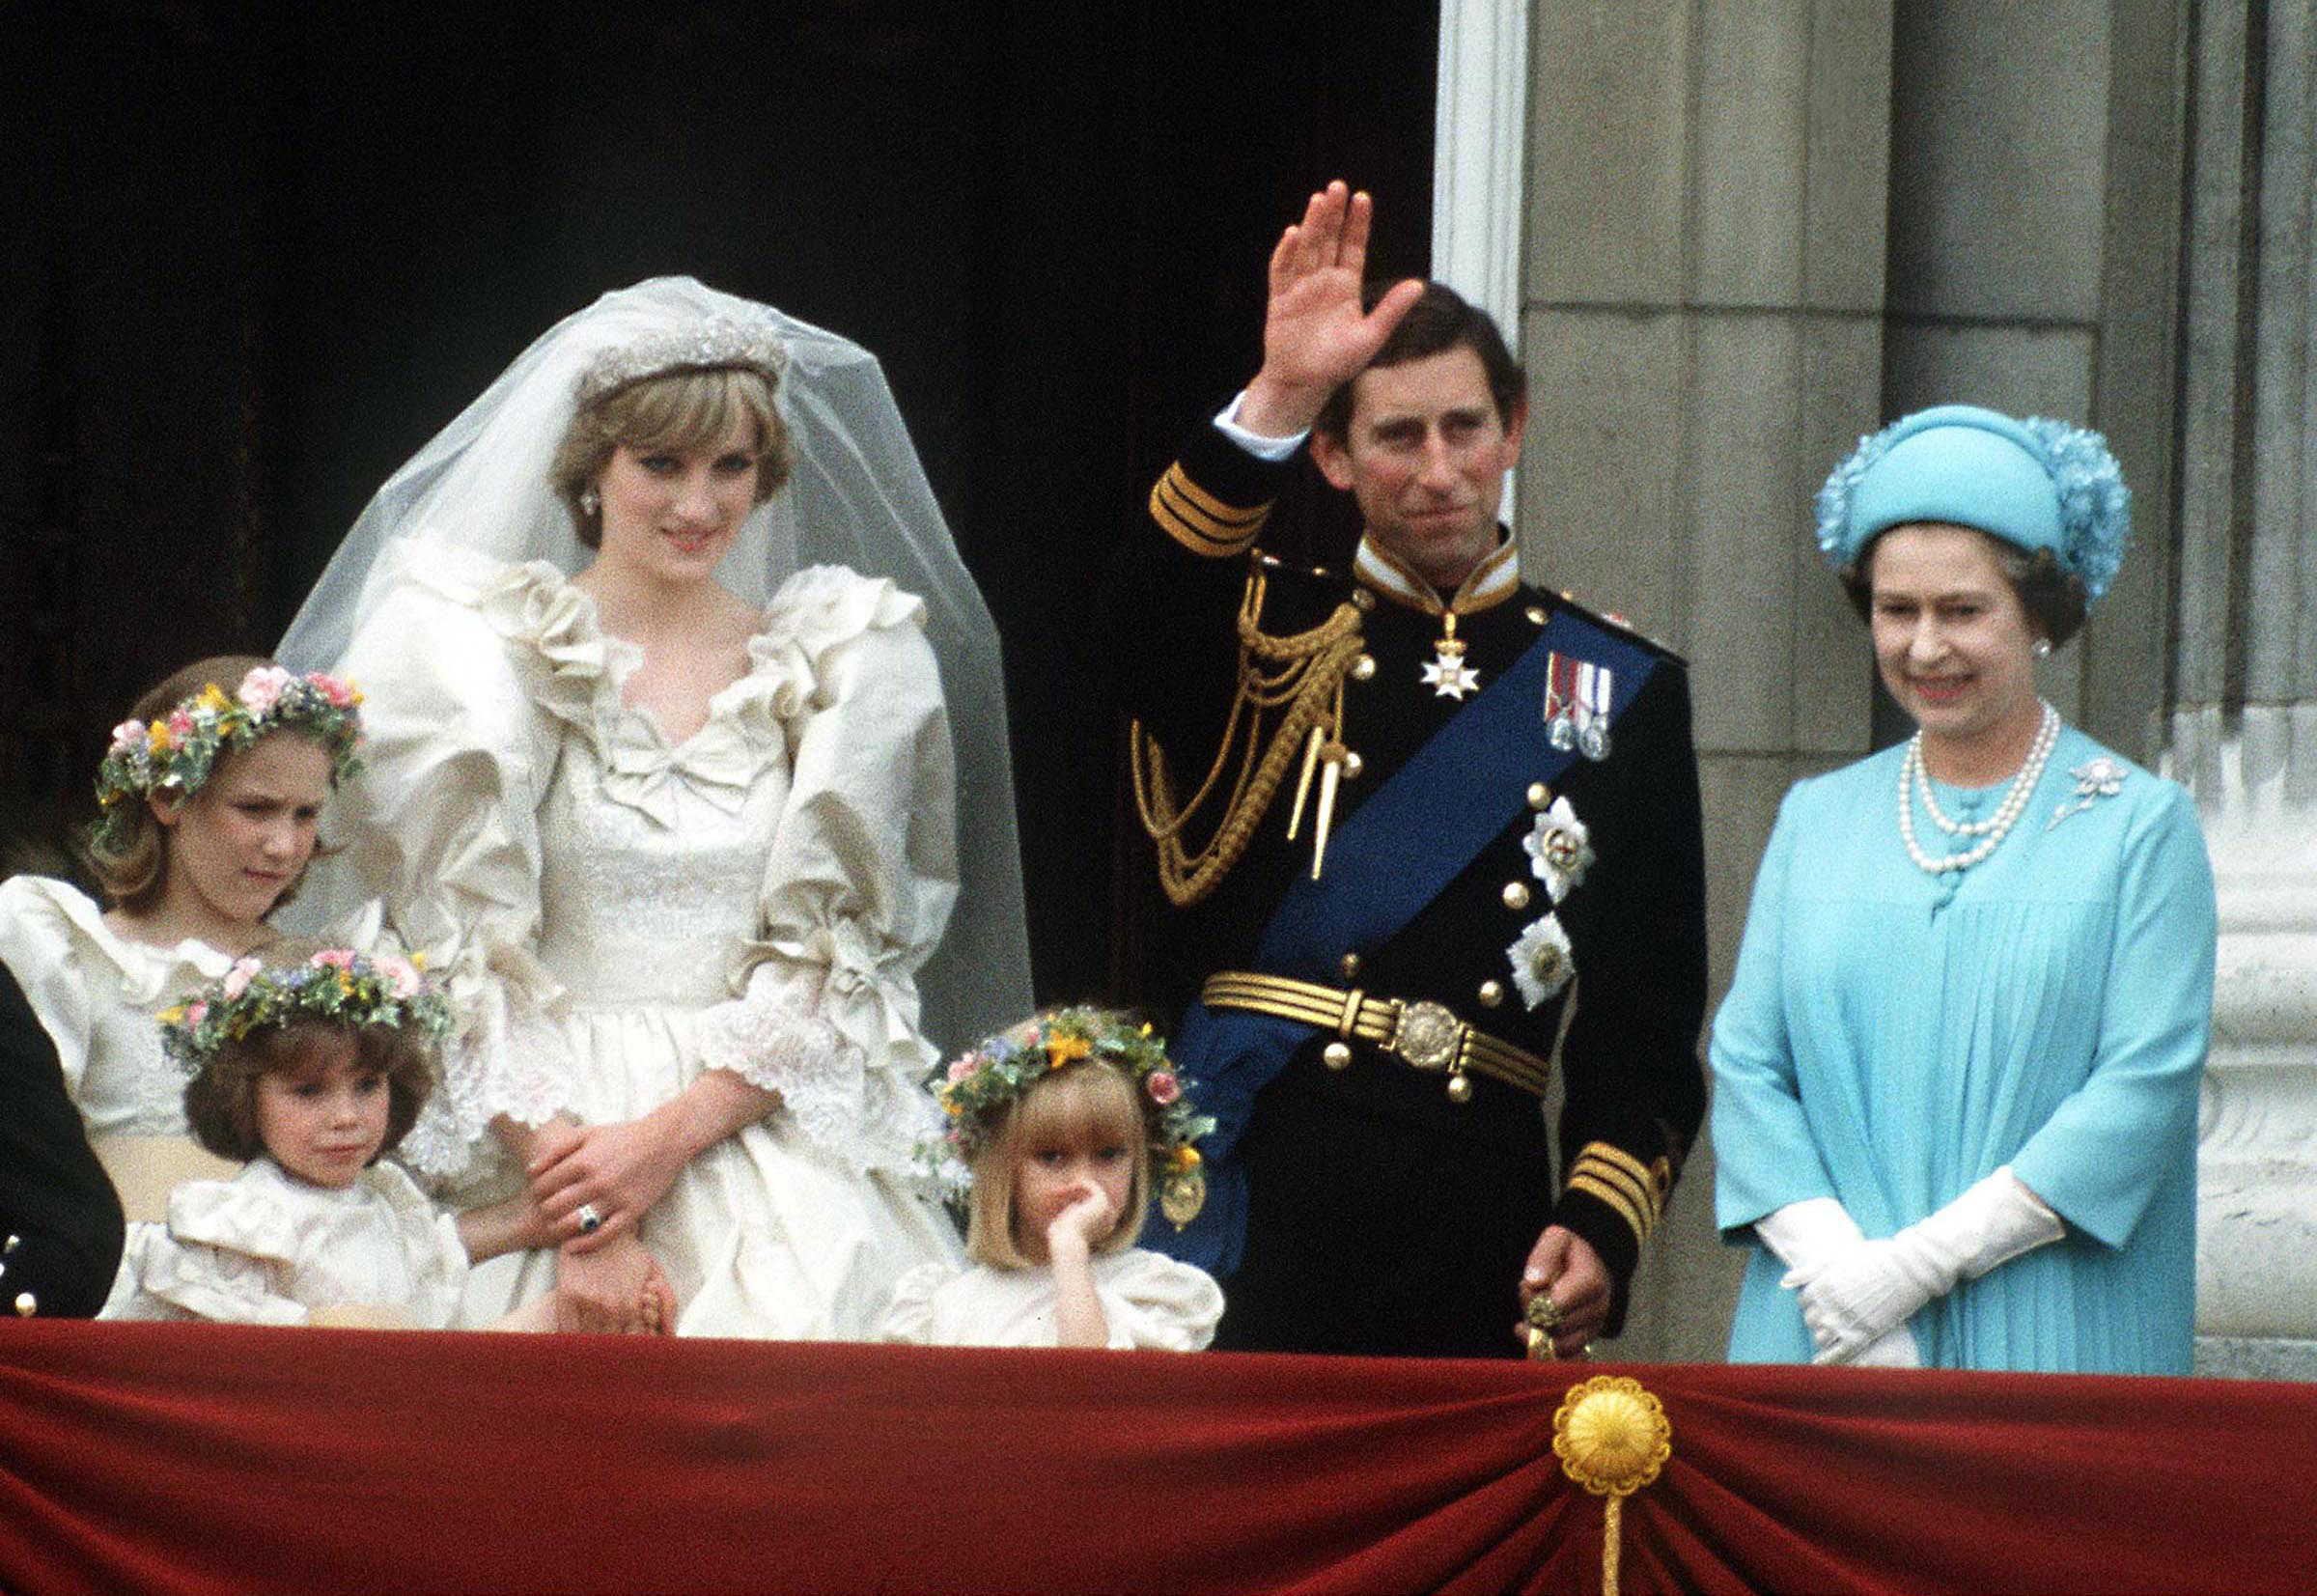 The Prince and Princess of Wales pose on the balcony of Buckingham Palace on their wedding day, with the Queen and some of the bridesmaids.